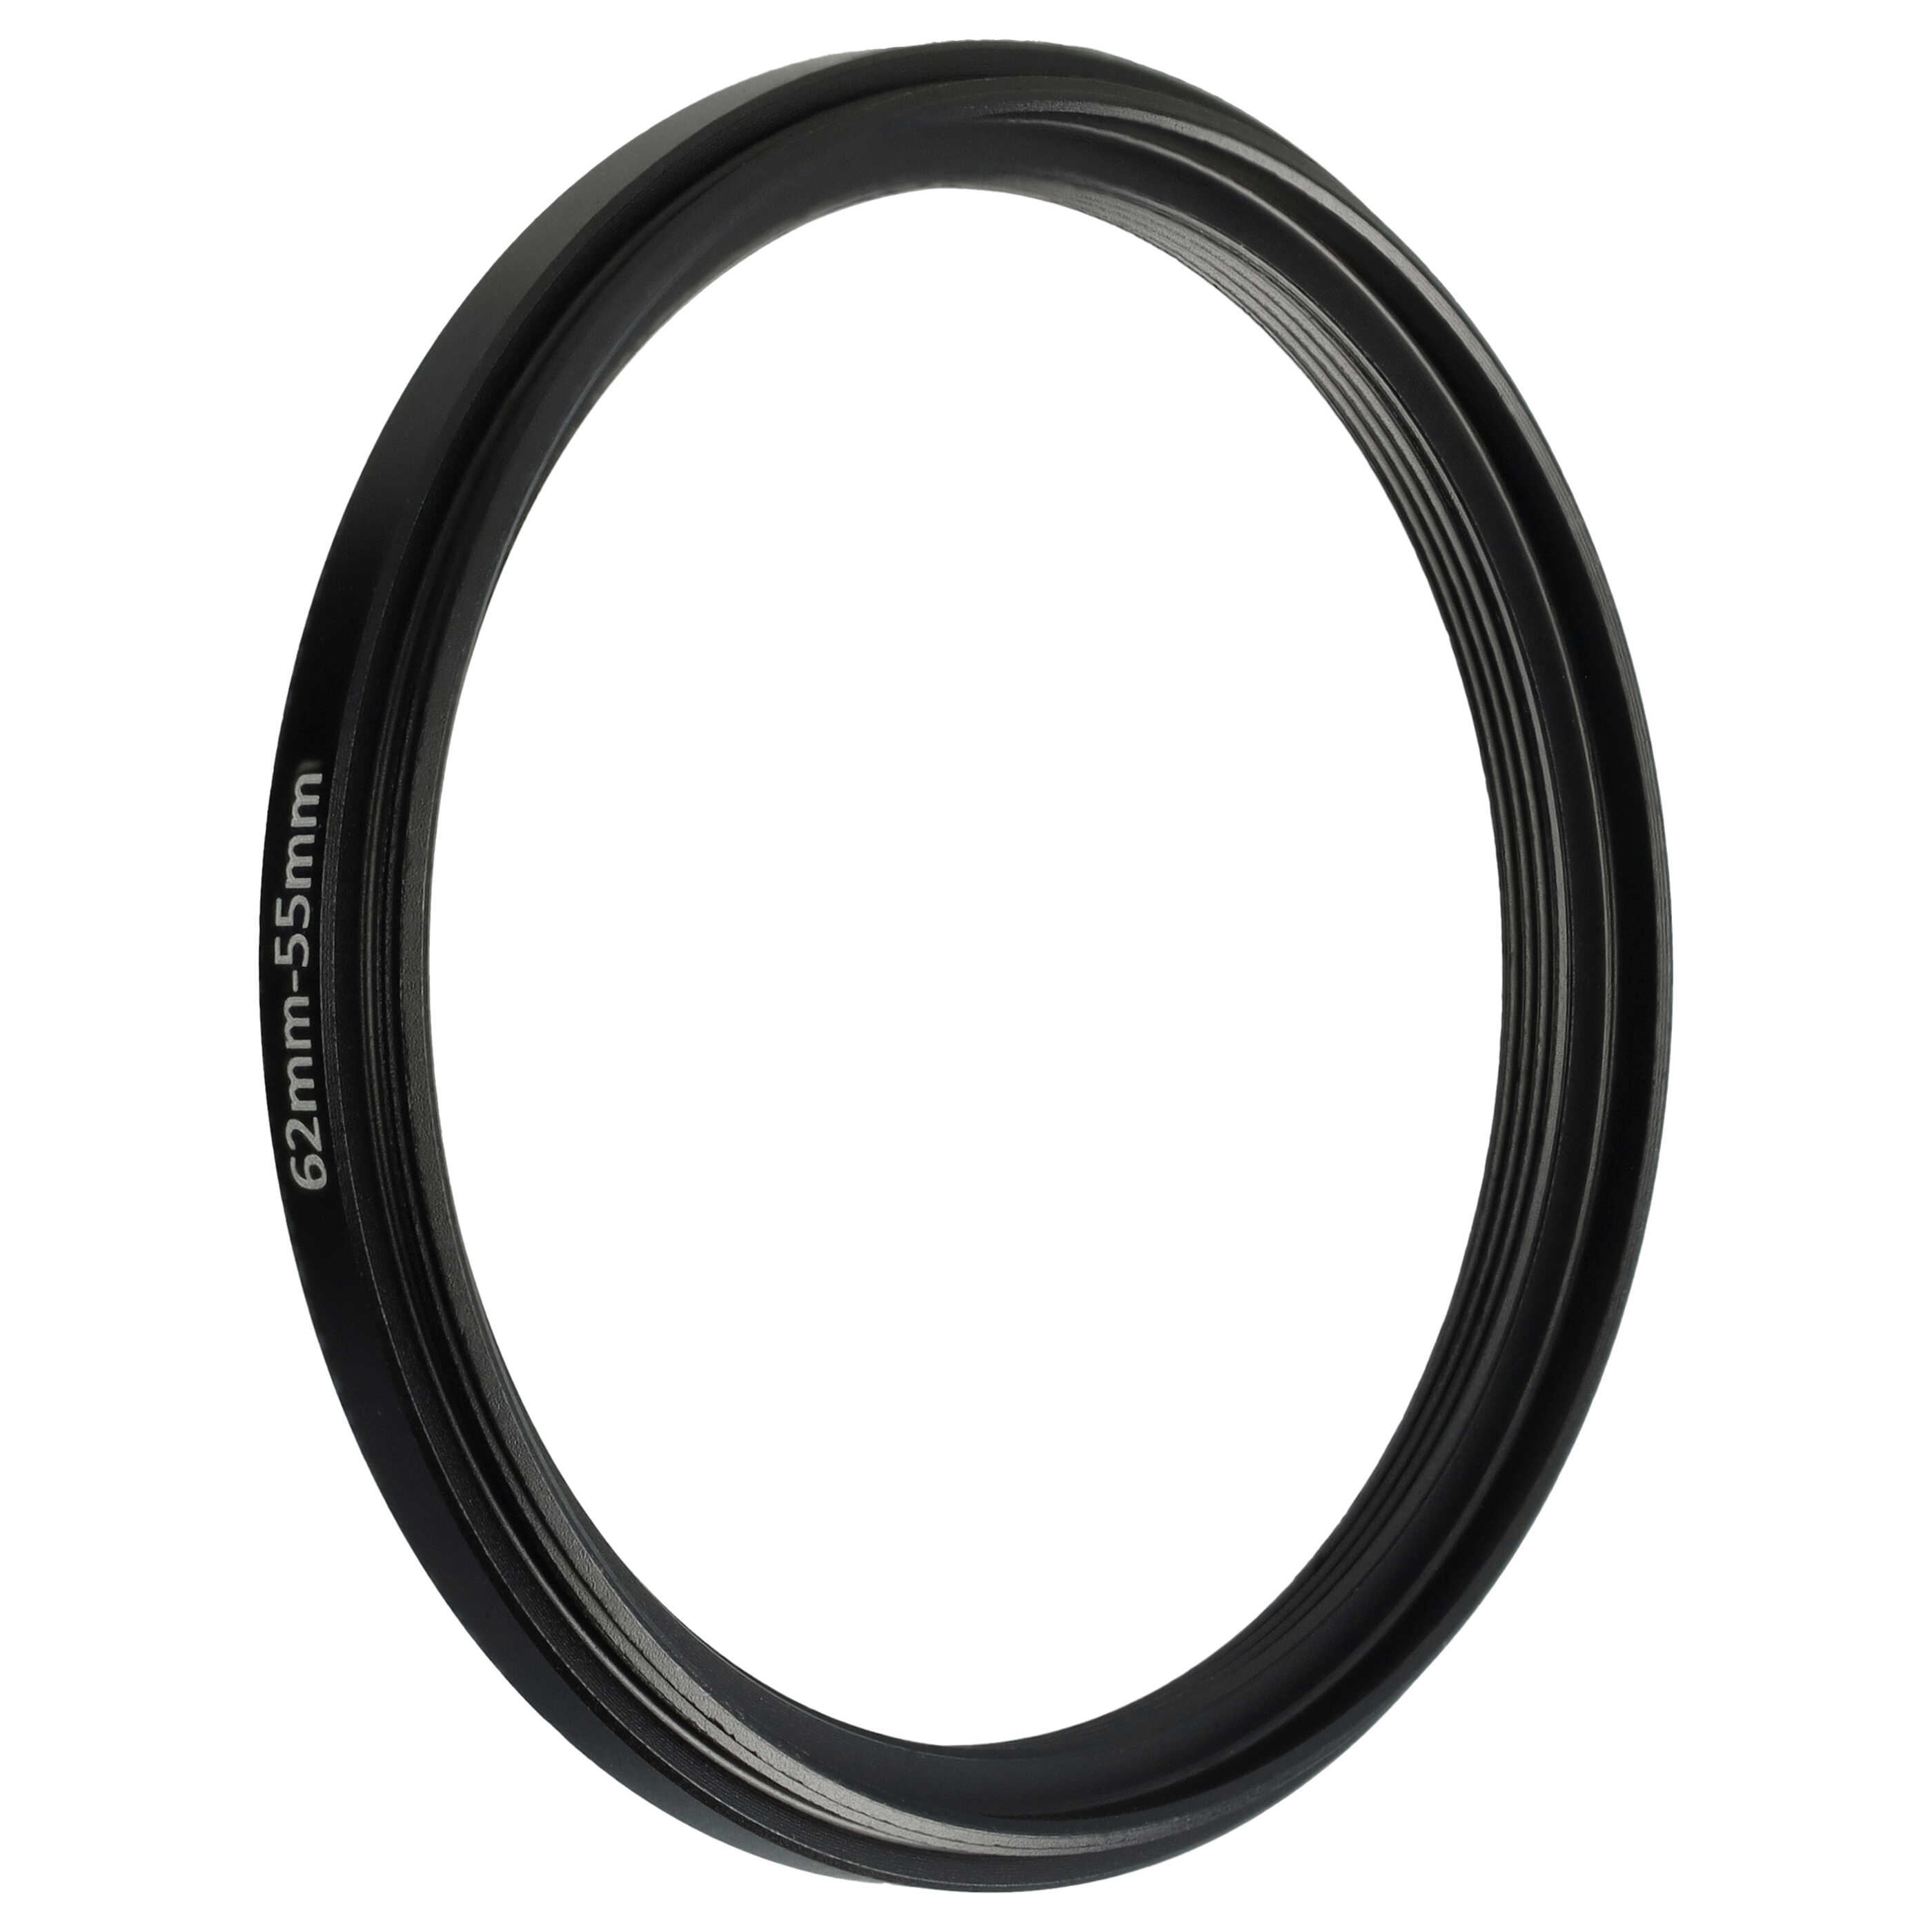 Step-Down Ring Adapter from 62 mm to 55 mm suitable for Camera Lens - Filter Adapter, metal